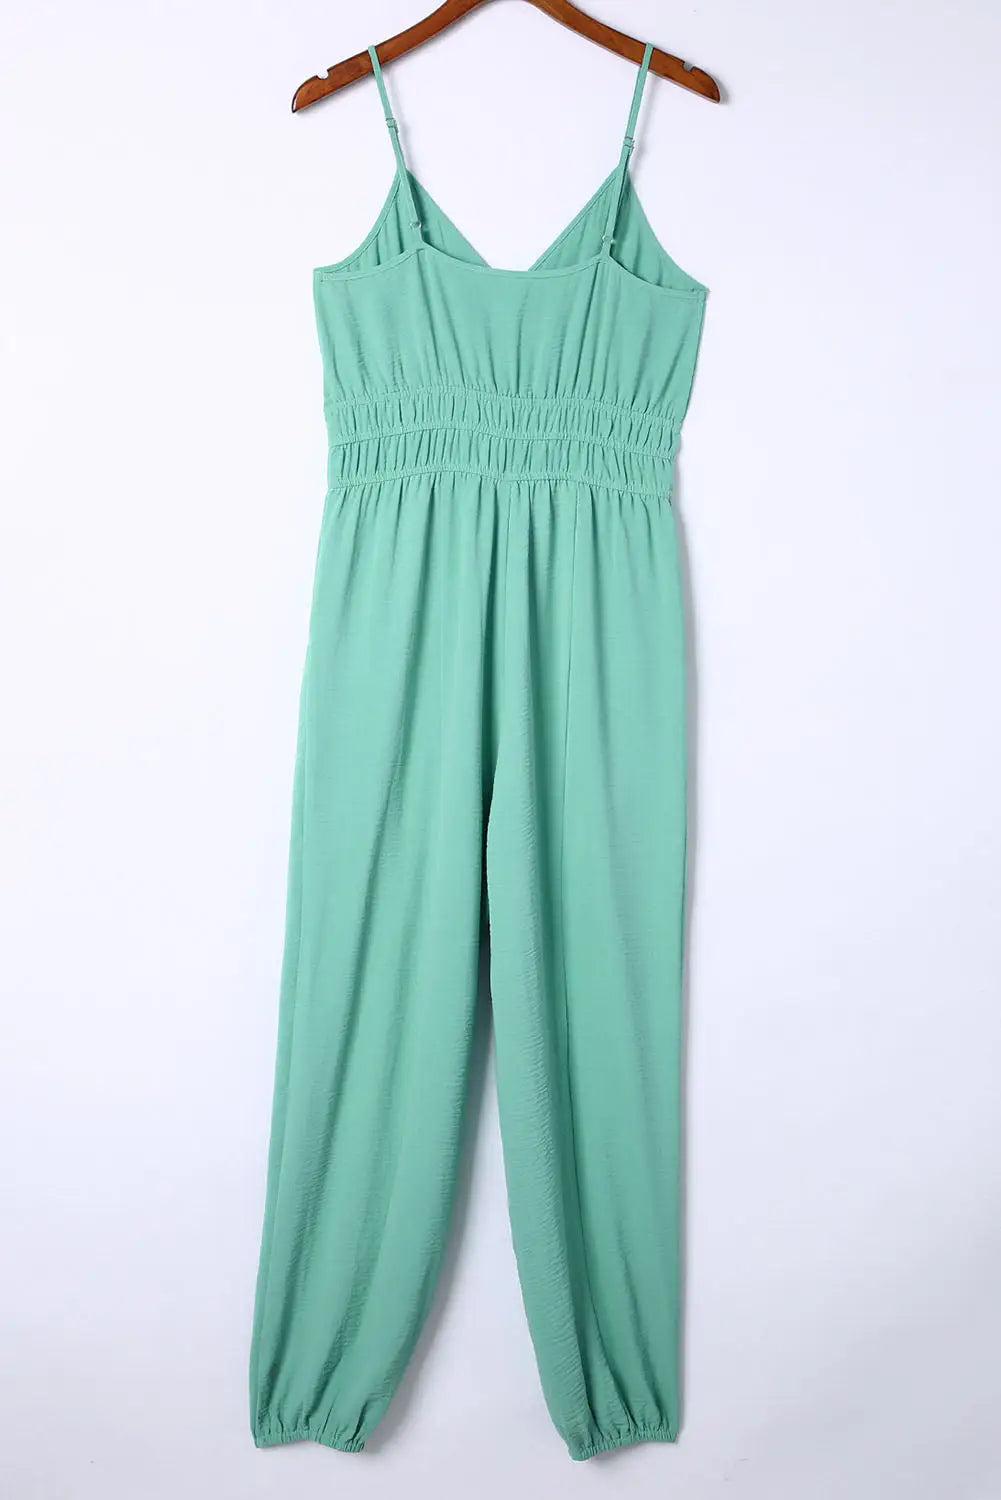 Green shirred high waist sleeveless v neck jumpsuit - jumpsuits & rompers